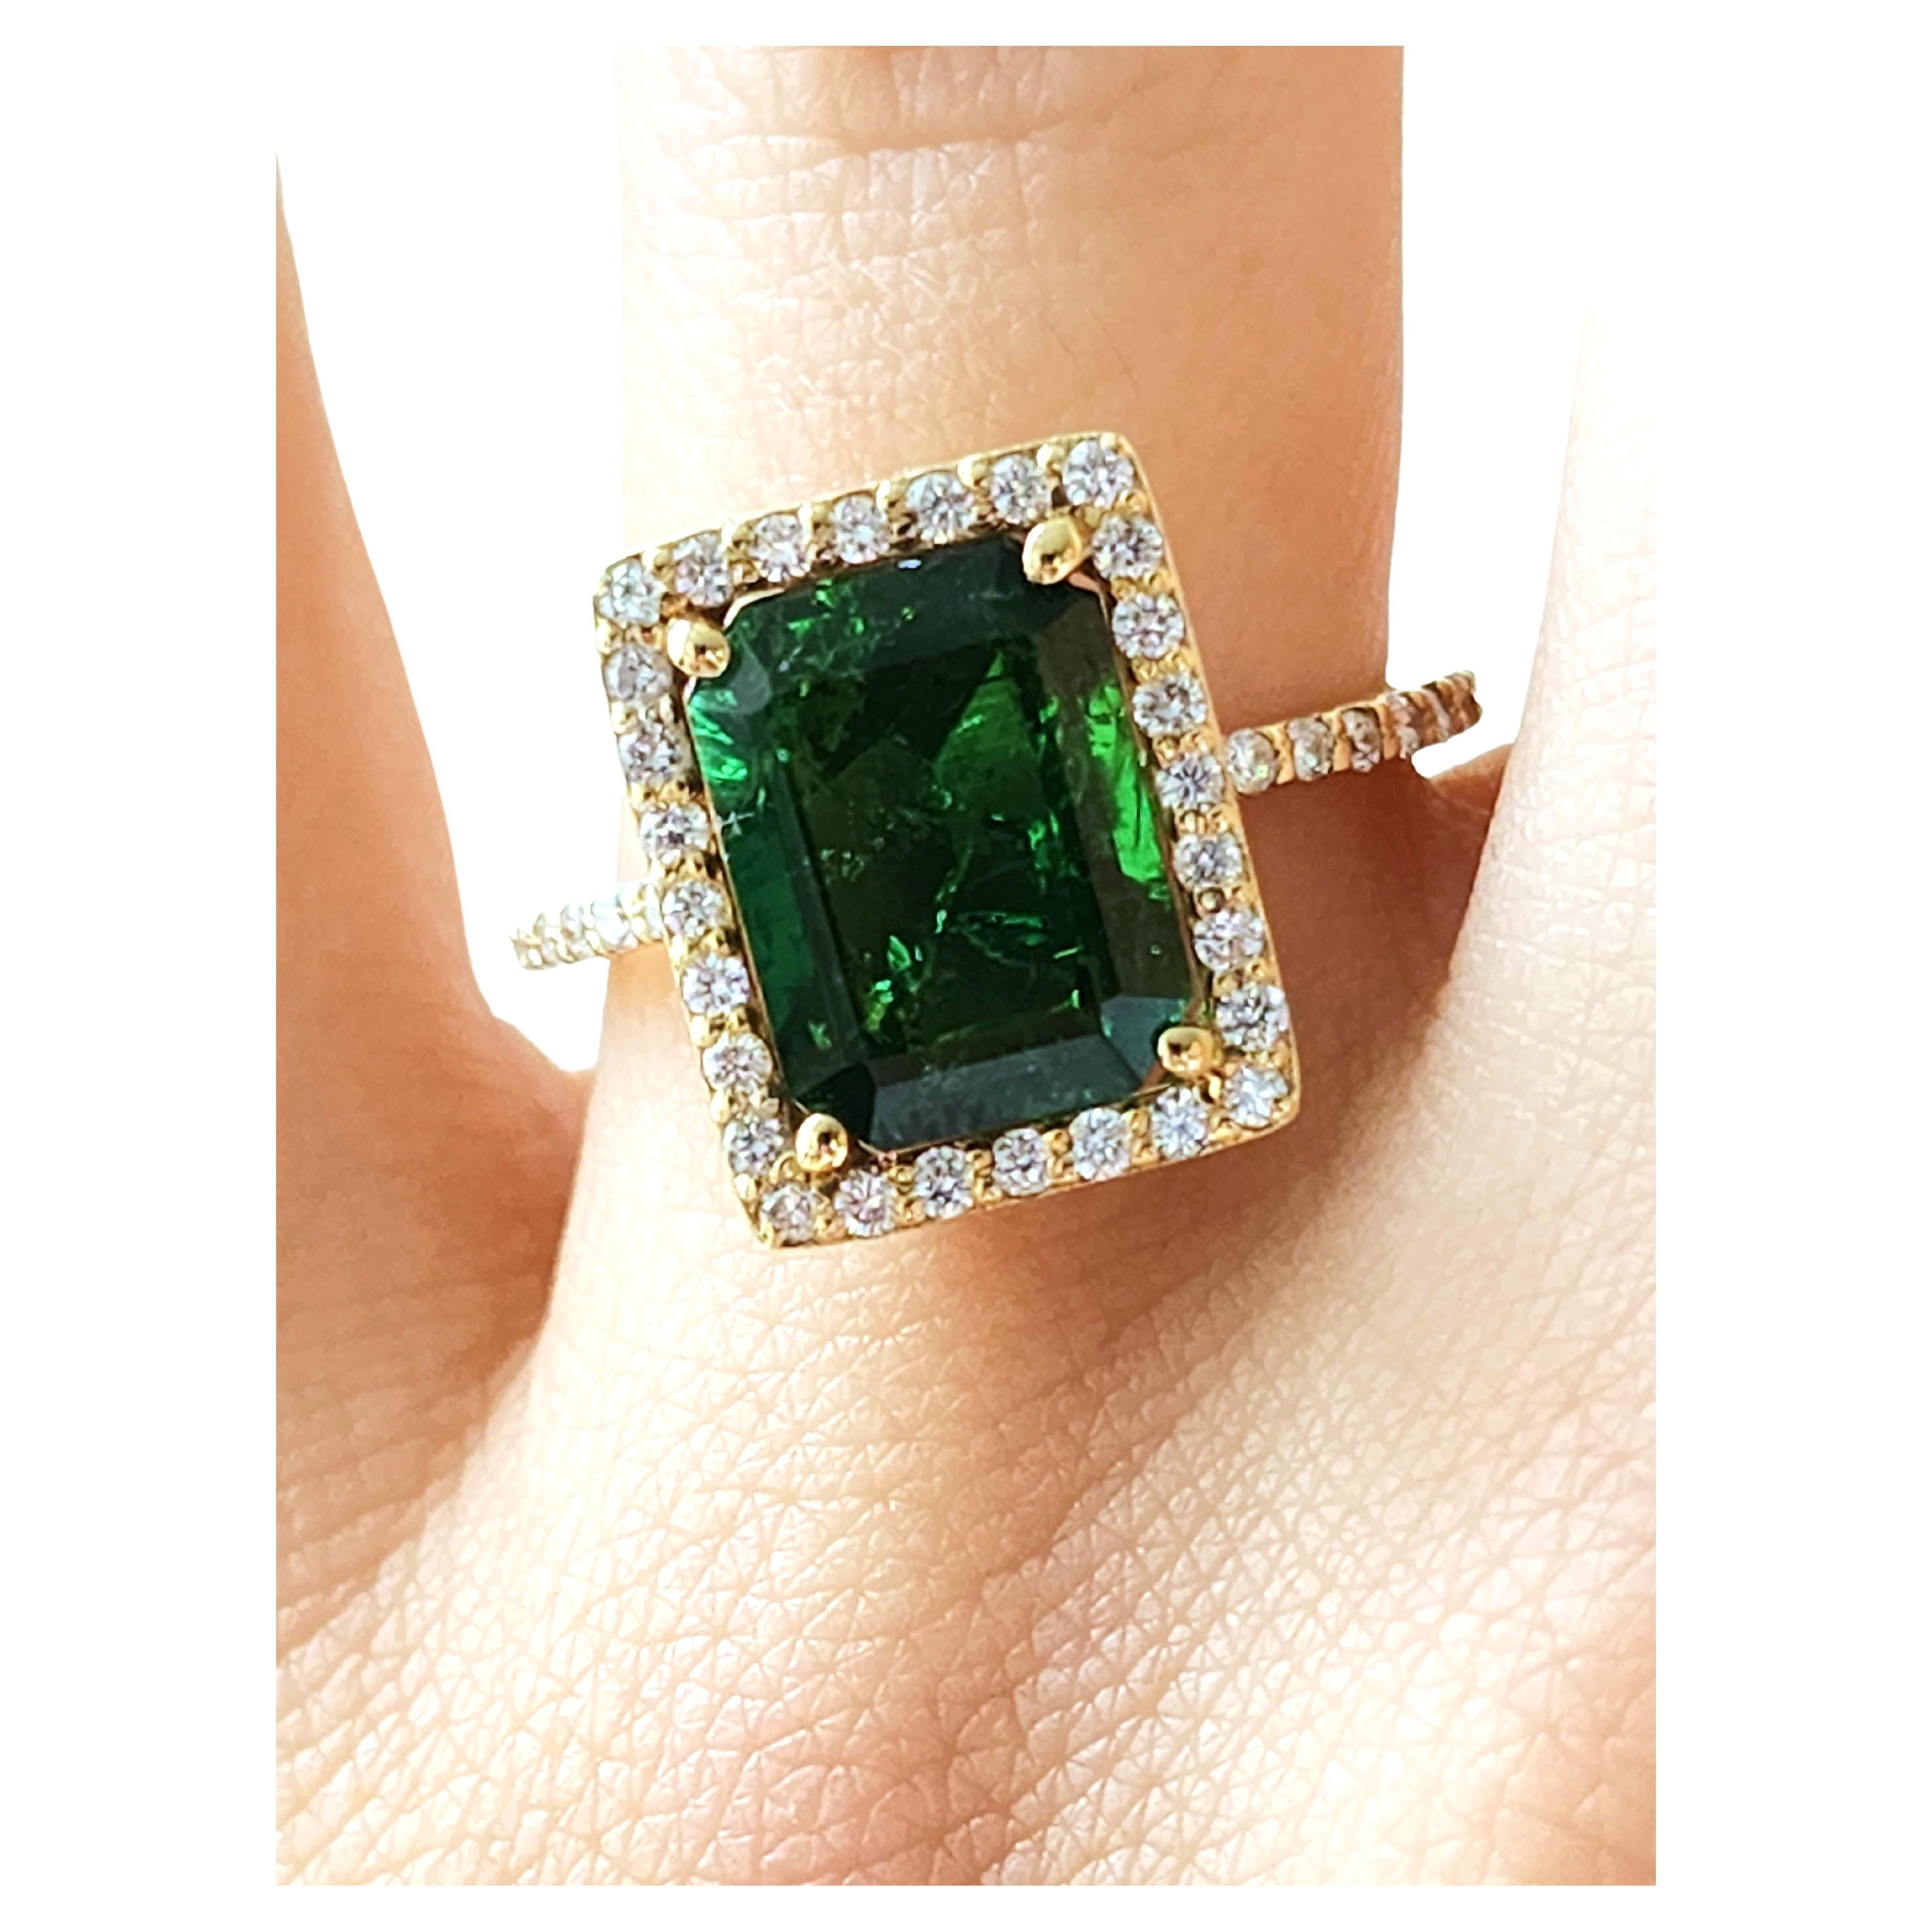 Set around beautiful small Round Diamonds including sidestones along the ring (Total Weight 0.4 Carat), sits an intense Green Emerald (Total Weight 3.7 Carat) in 14 K Yellow Gold. A unique ring fit to upgrade any outfit or occassion this season! 